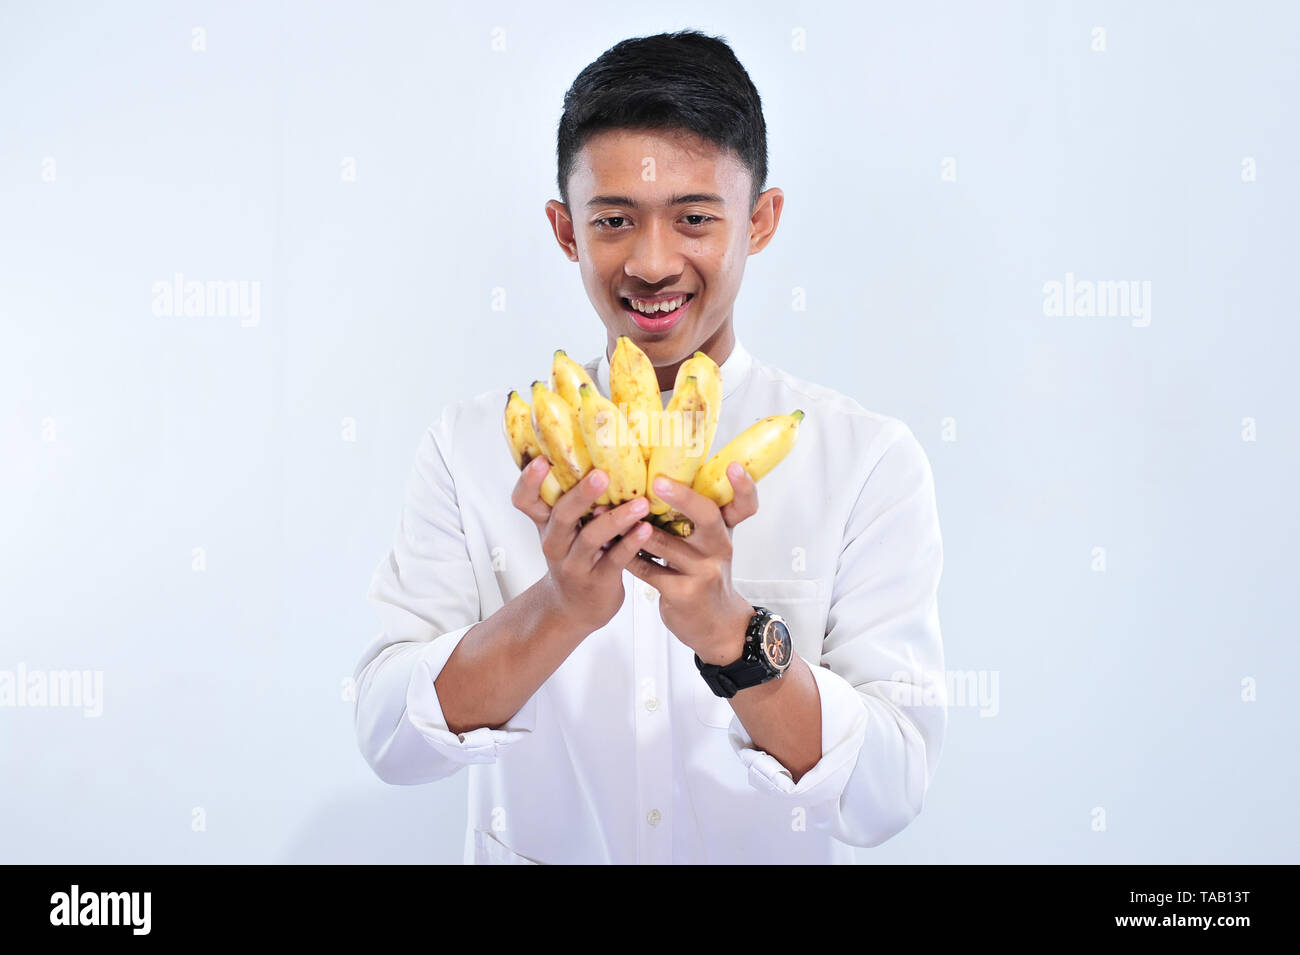 Young muslim man happy fasting when breaking the fast (Iftar) and suhoor eat yellow banana islolated in white background Stock Photo